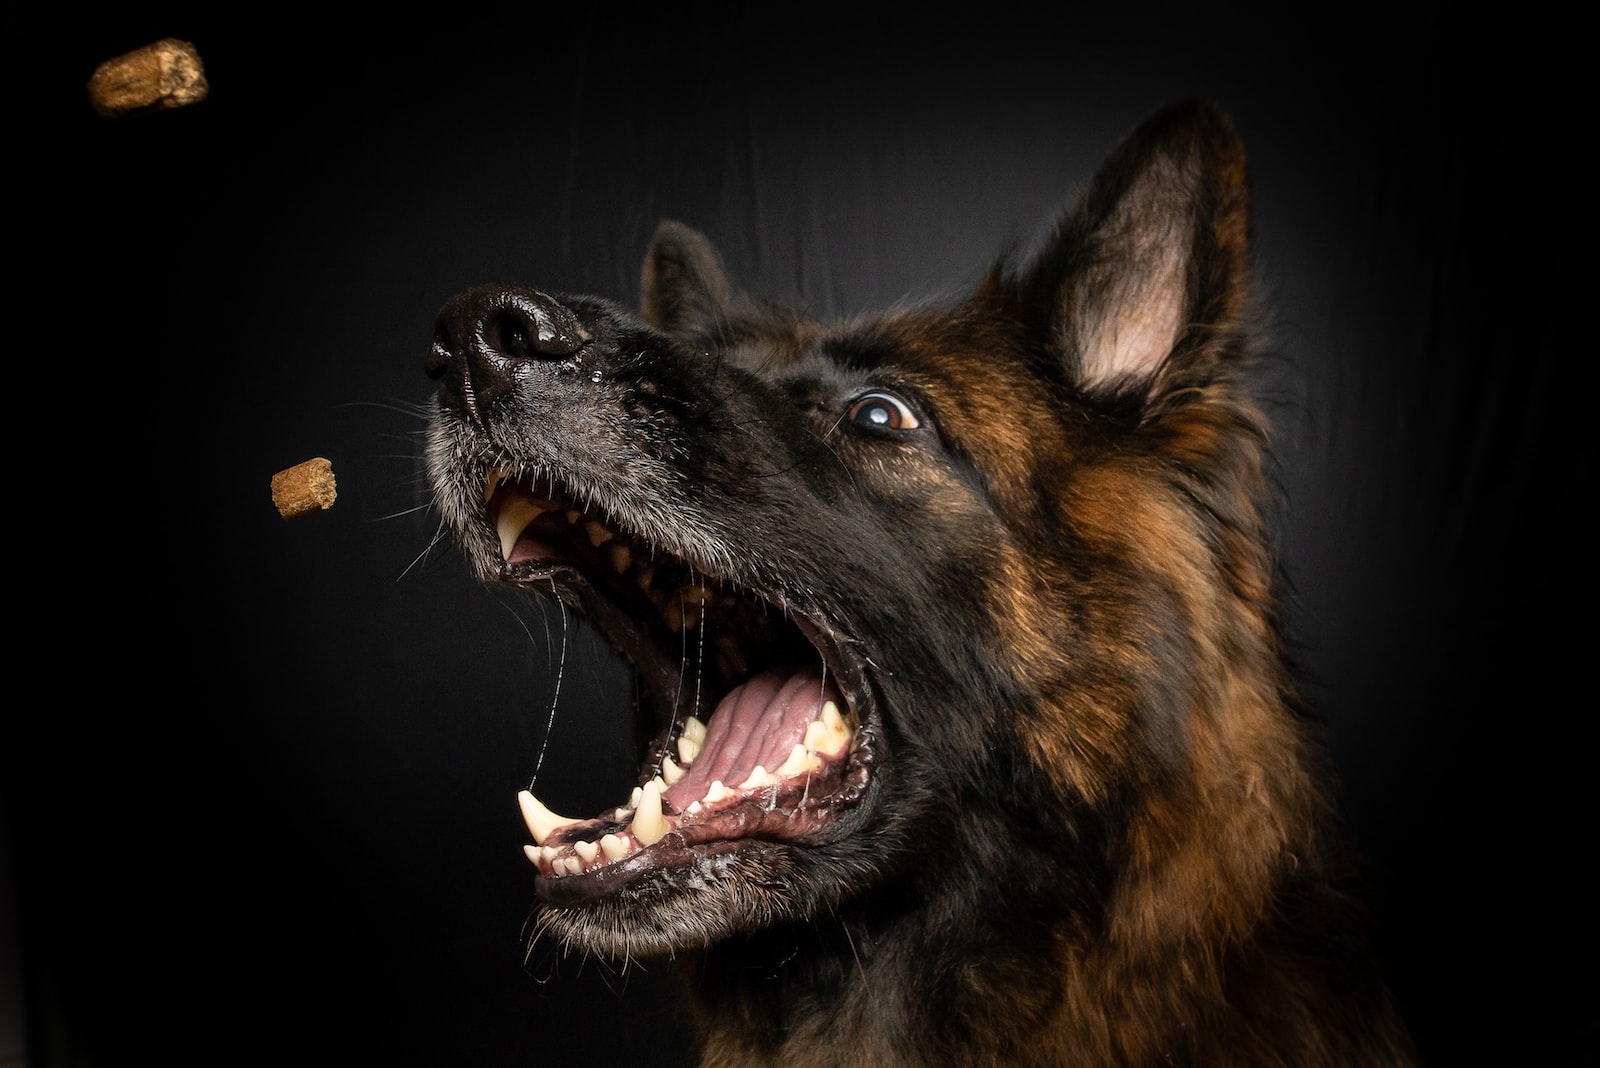 brown and black medium-coated dog opening mouth